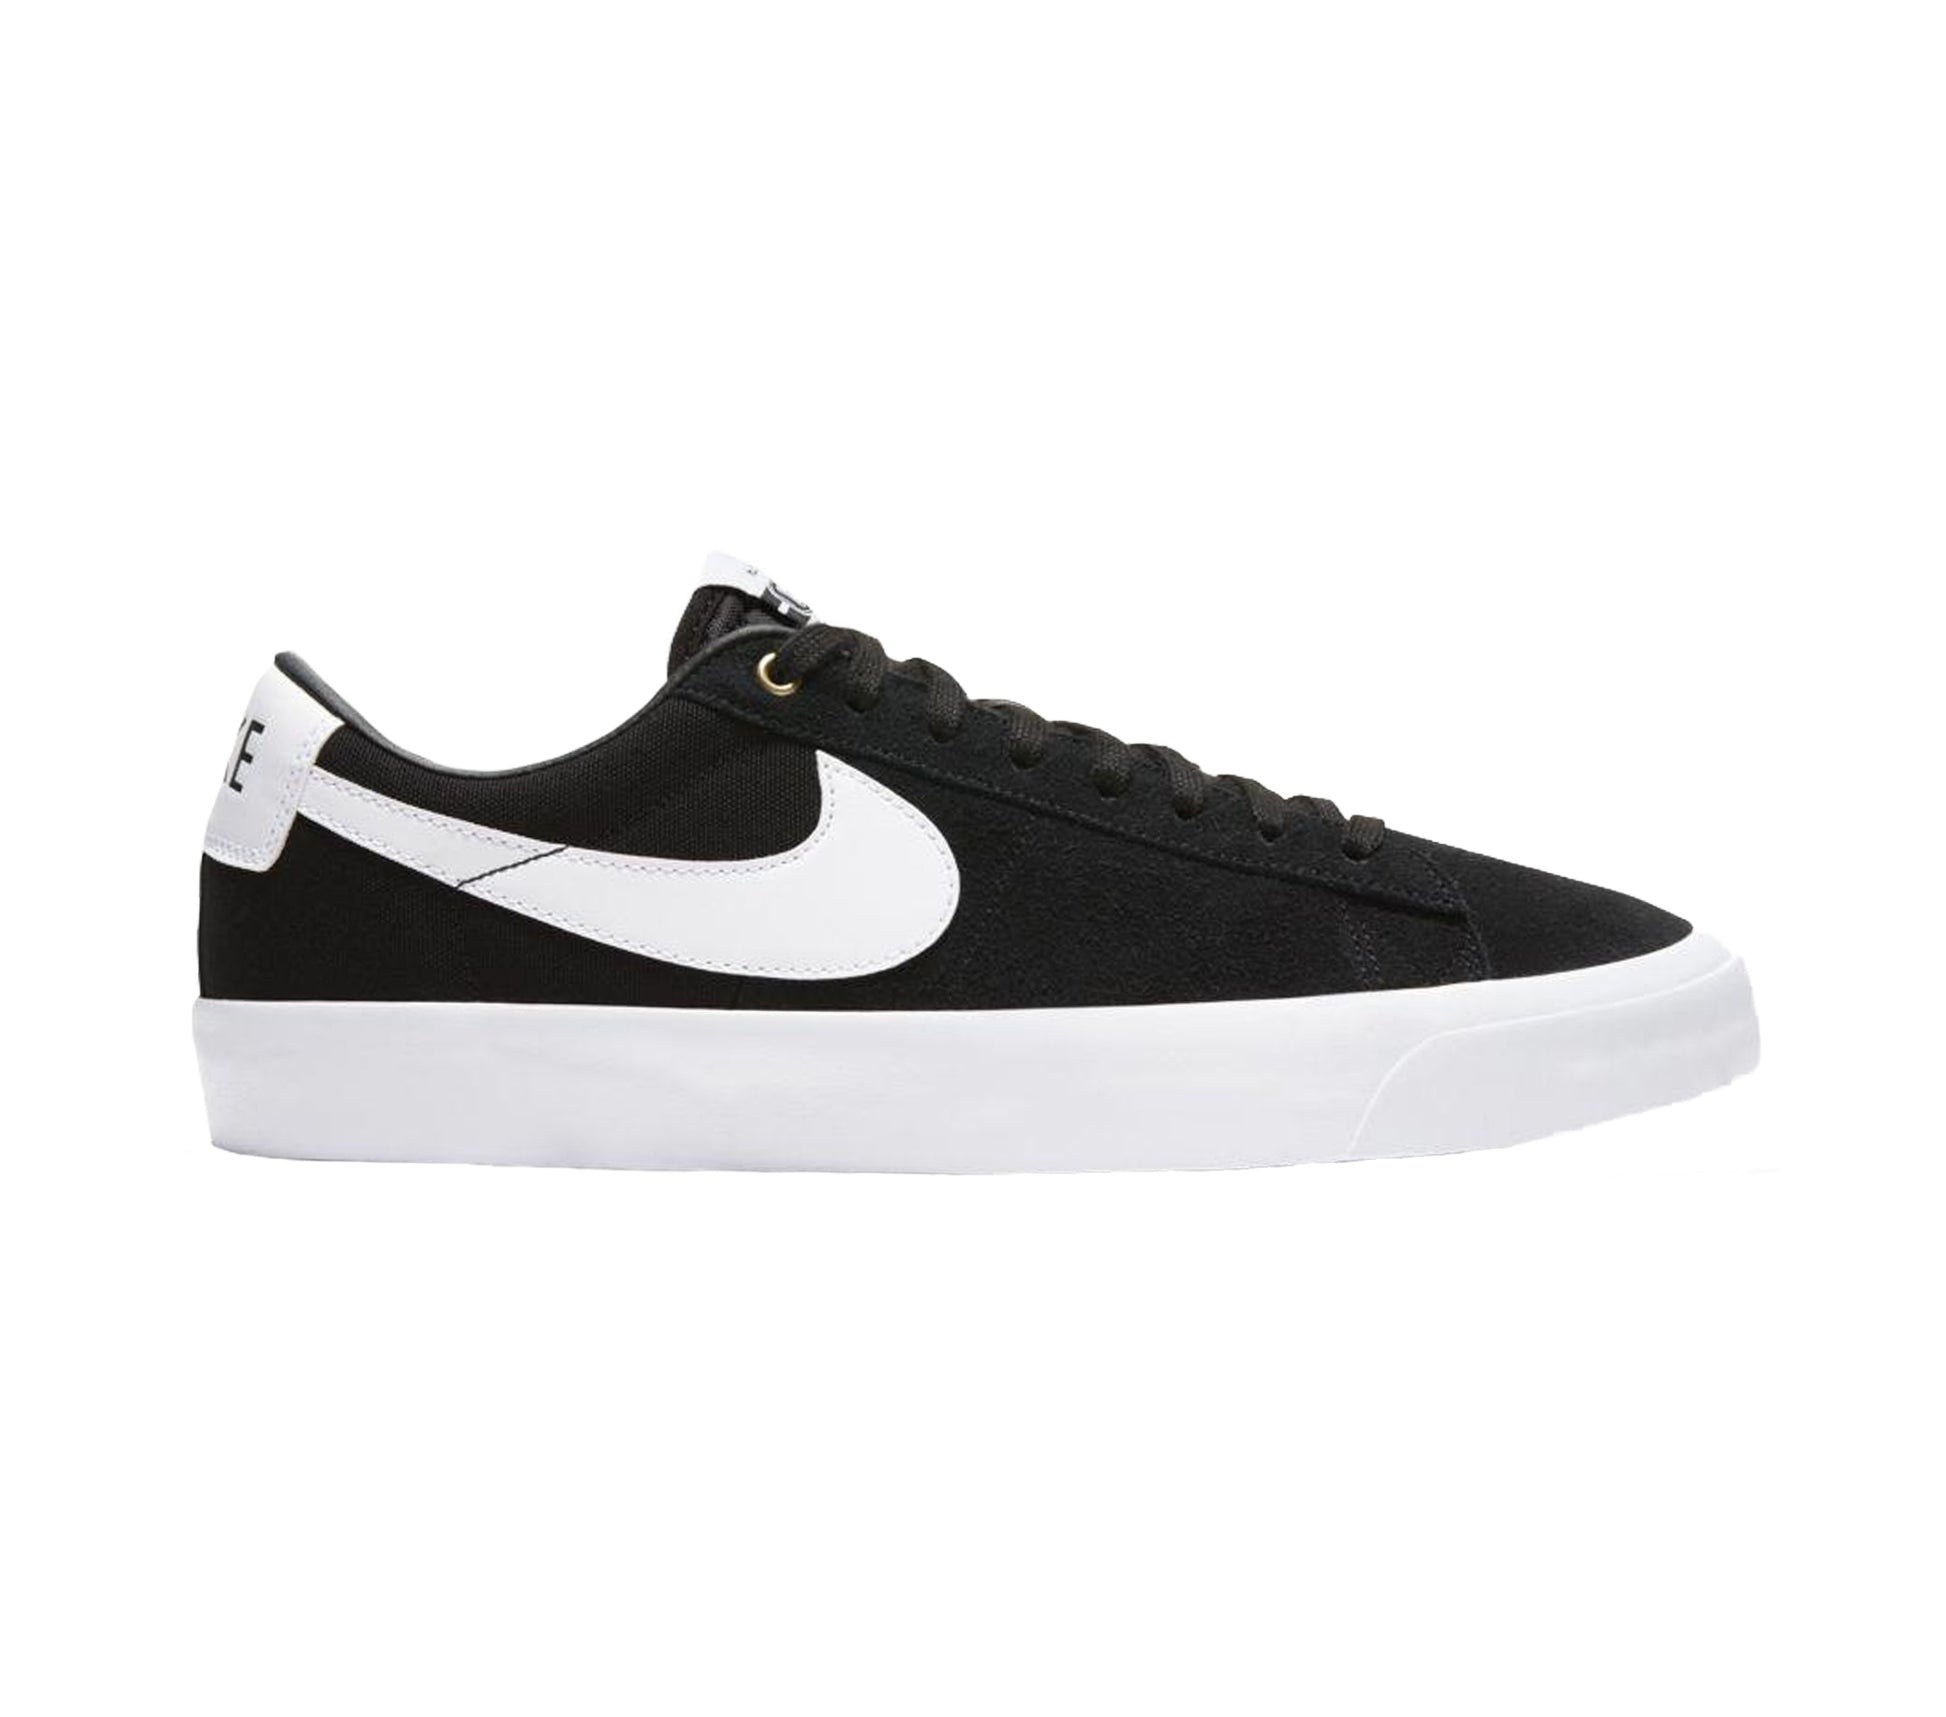 Nike SB Zoom Blazer Low GT skate shoe side view. Black upper with white sole and large white Nike swoosh on side with white nike branded heel tab. 